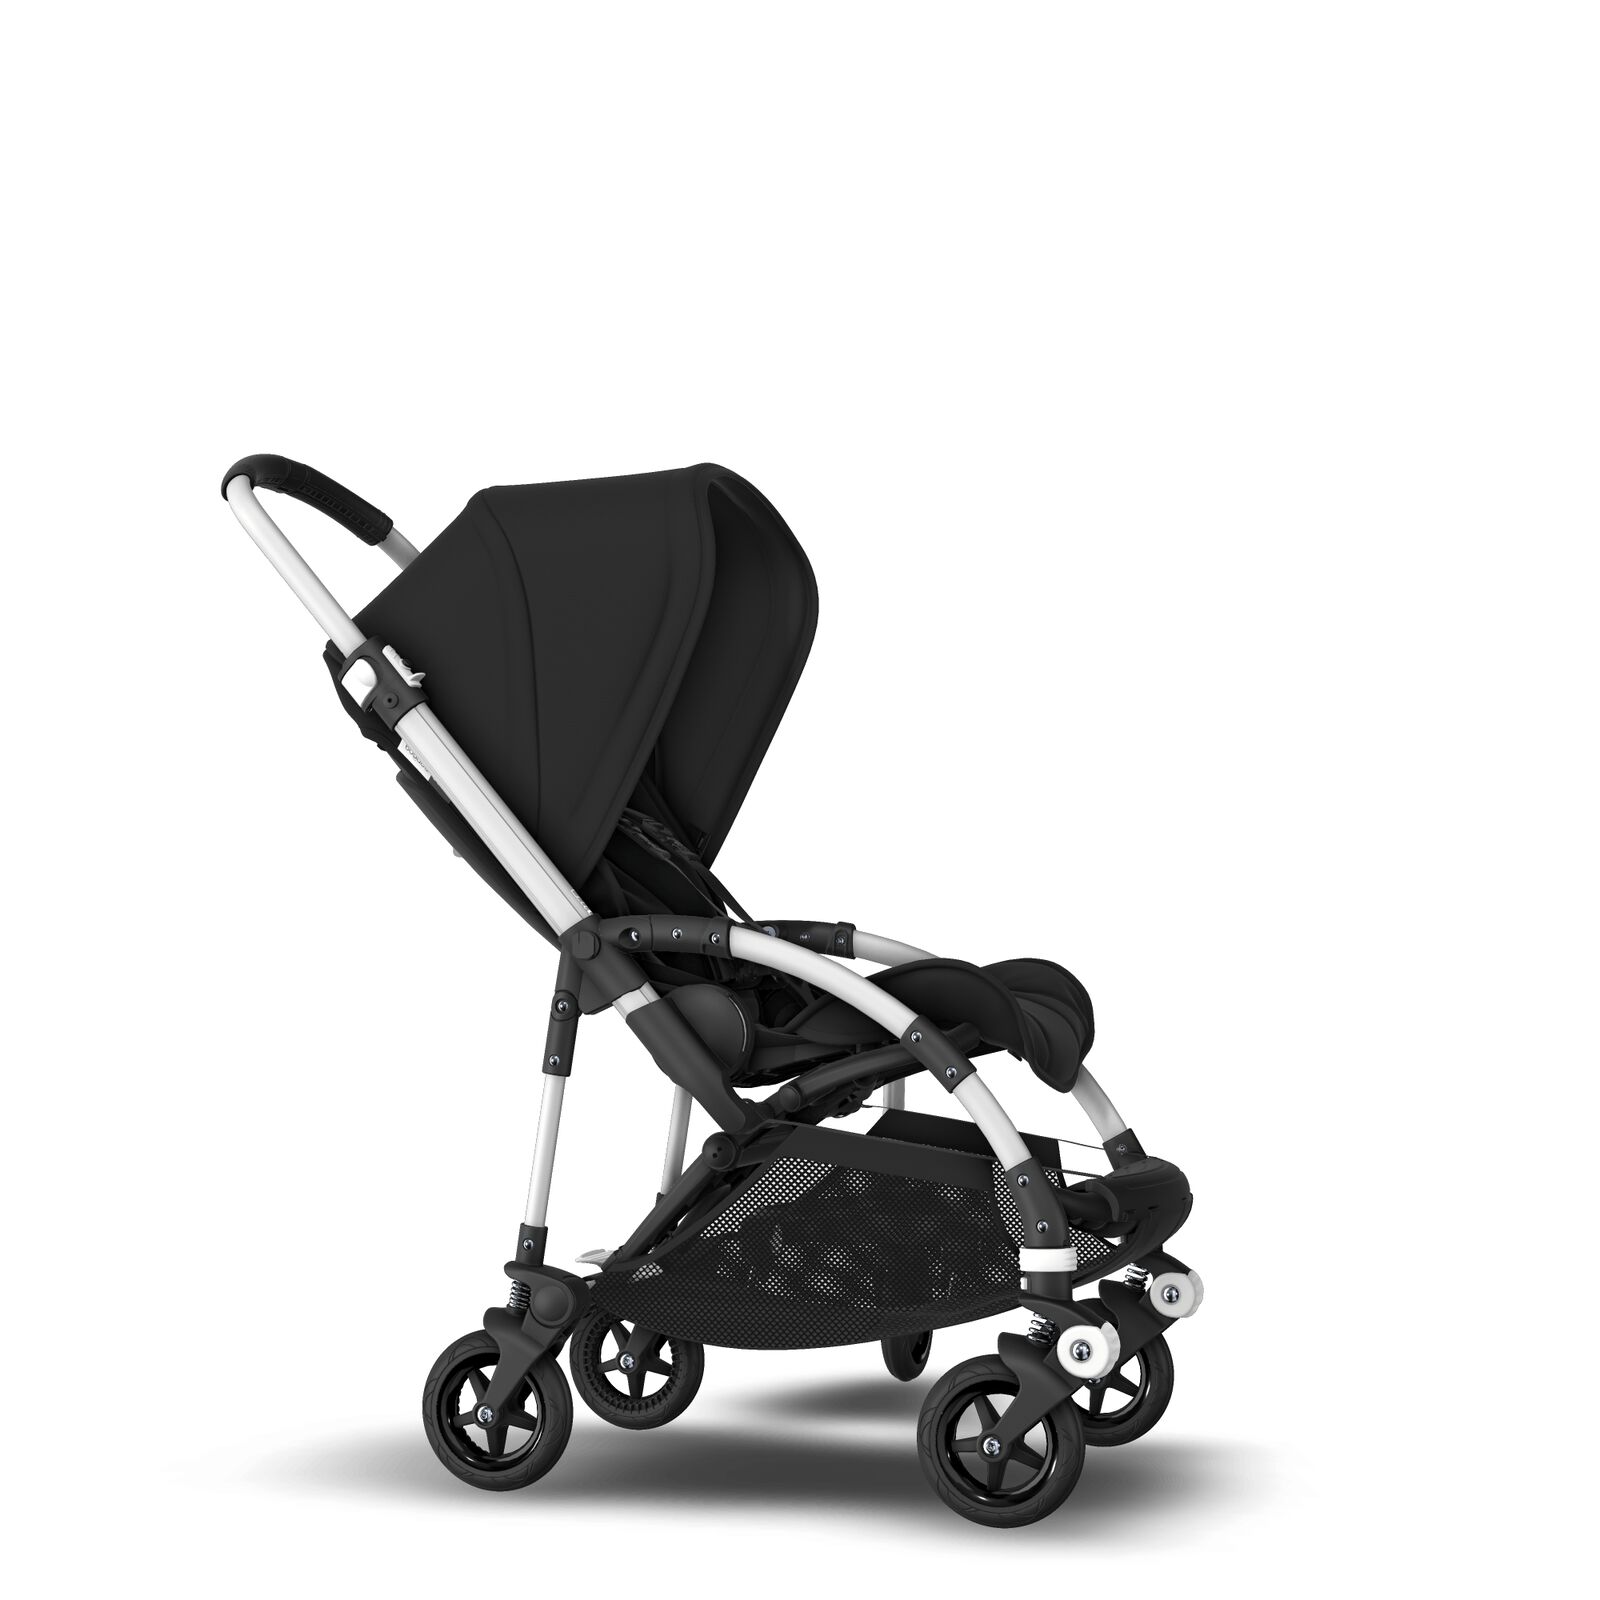 Bugaboo Seat stroller sit stand Bugaboo US